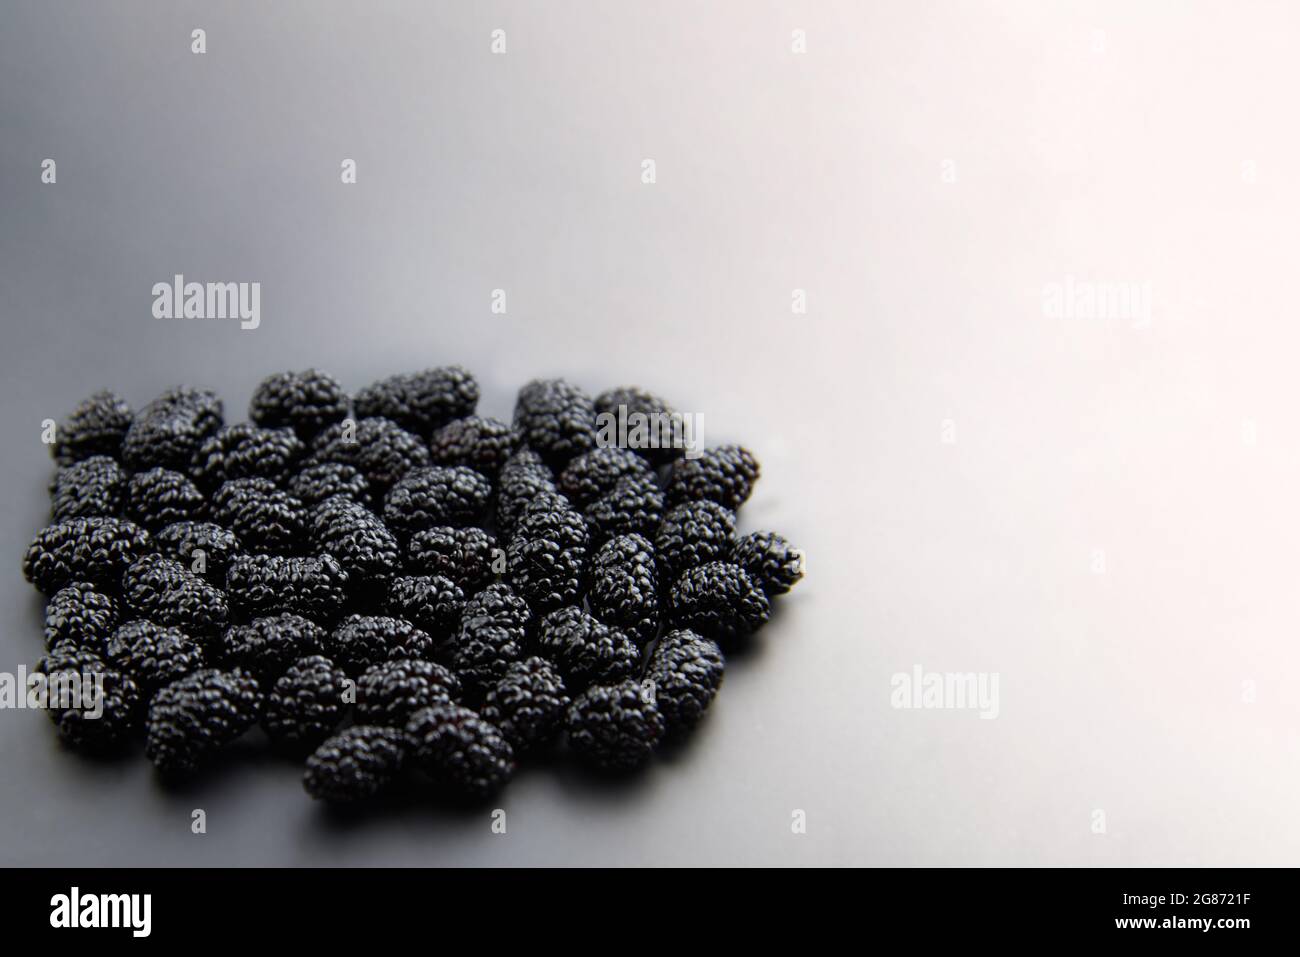 Fresh ripe mulberry on gray background, copy space, healthy food concept. Stock Photo